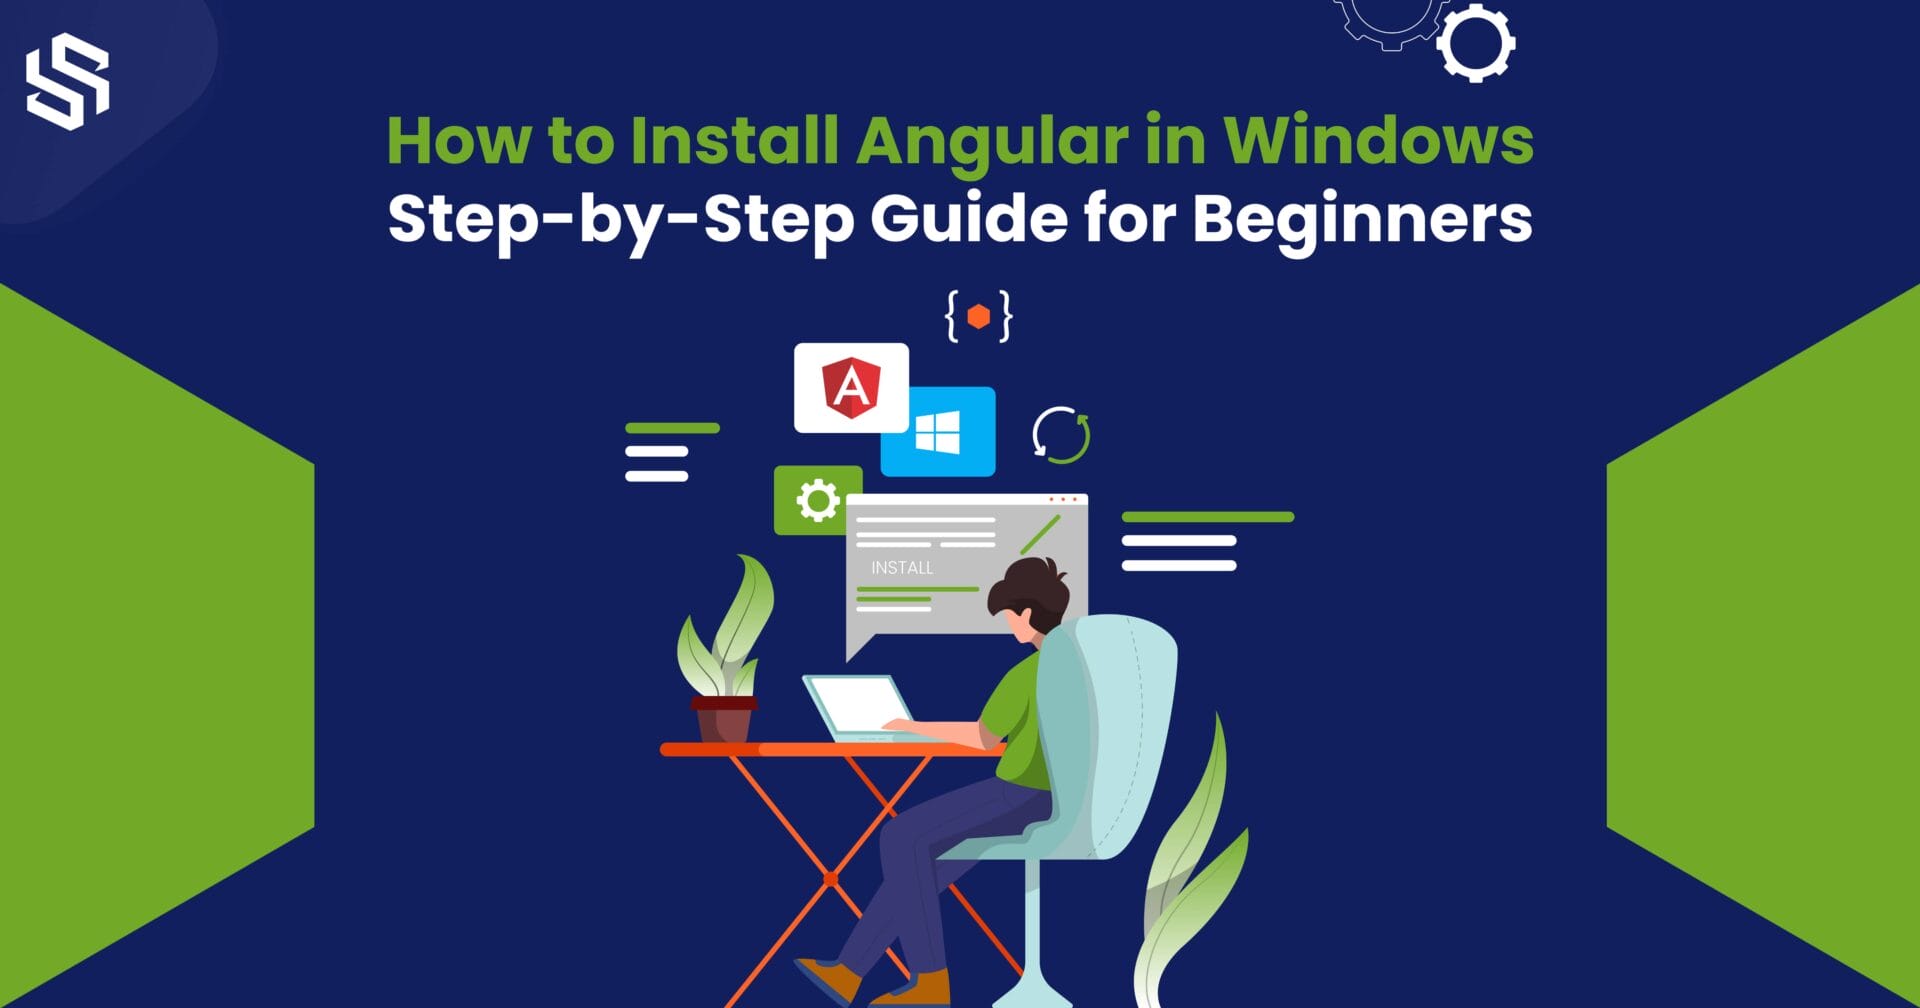 How to Install Angular in Windows Step-by-Step Guide for Beginners